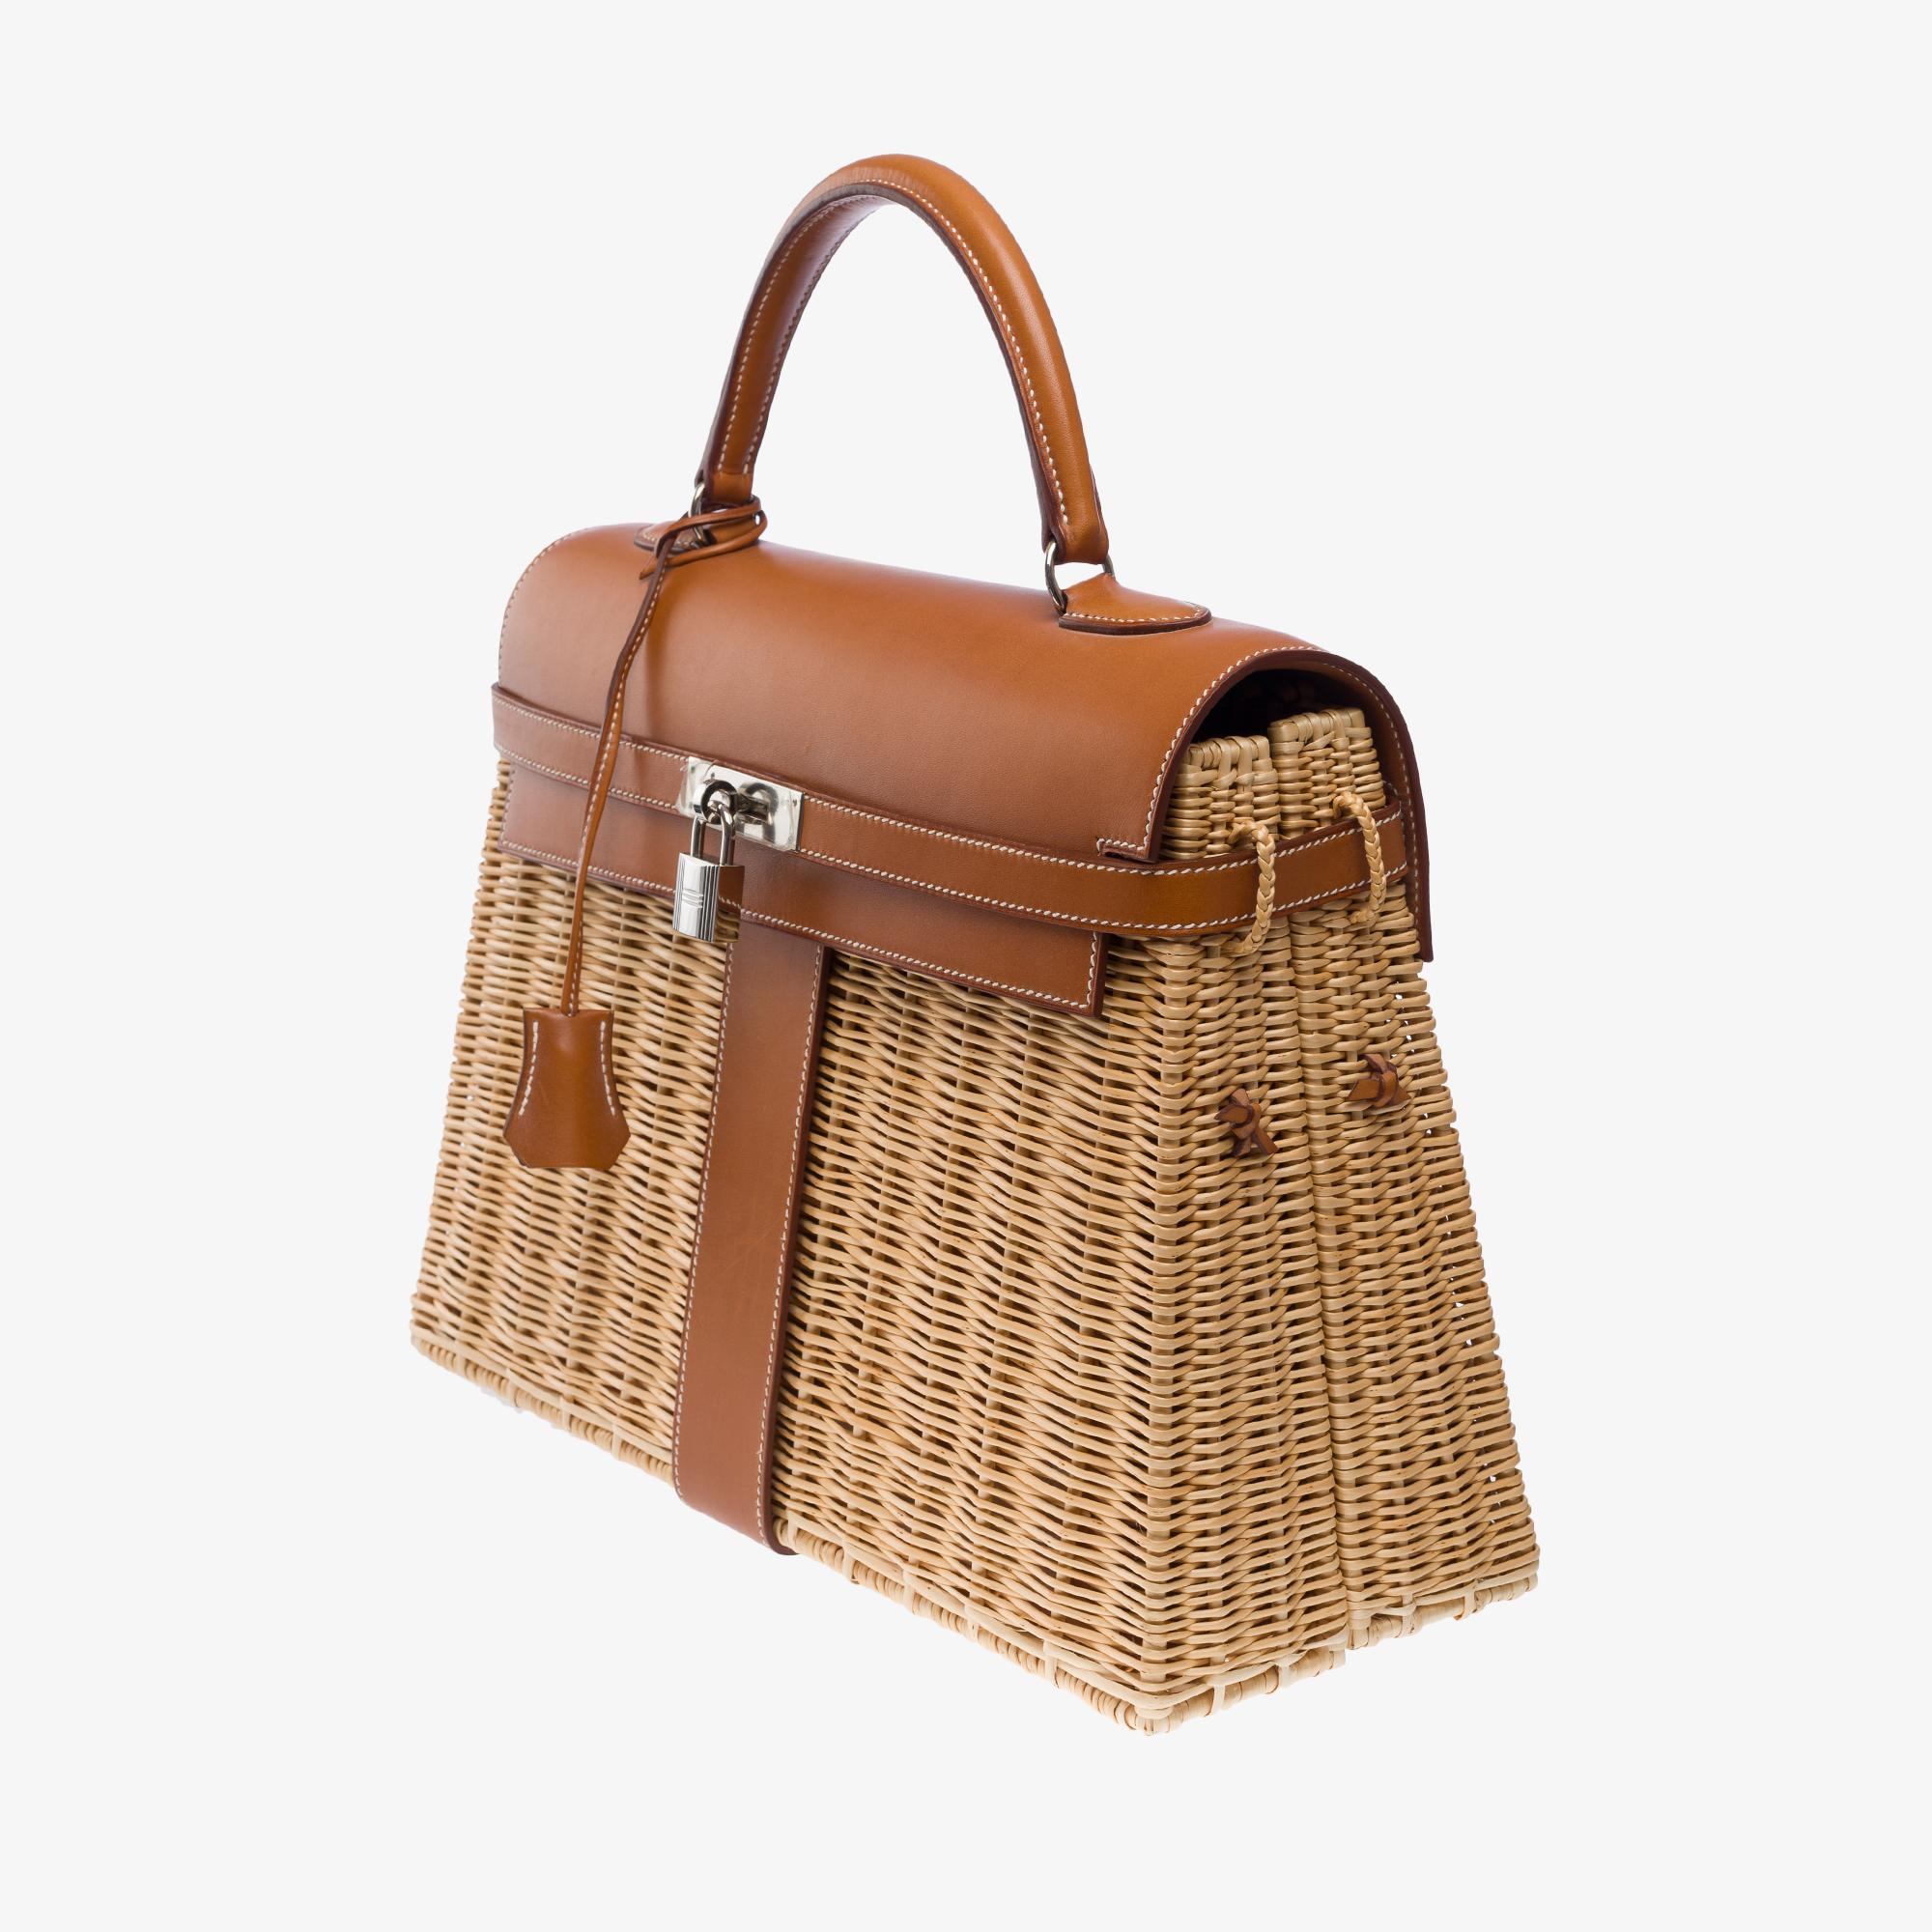 Rare Hermes Kelly 35 Picnic in wicker and barenia leather , SHW For Sale 1